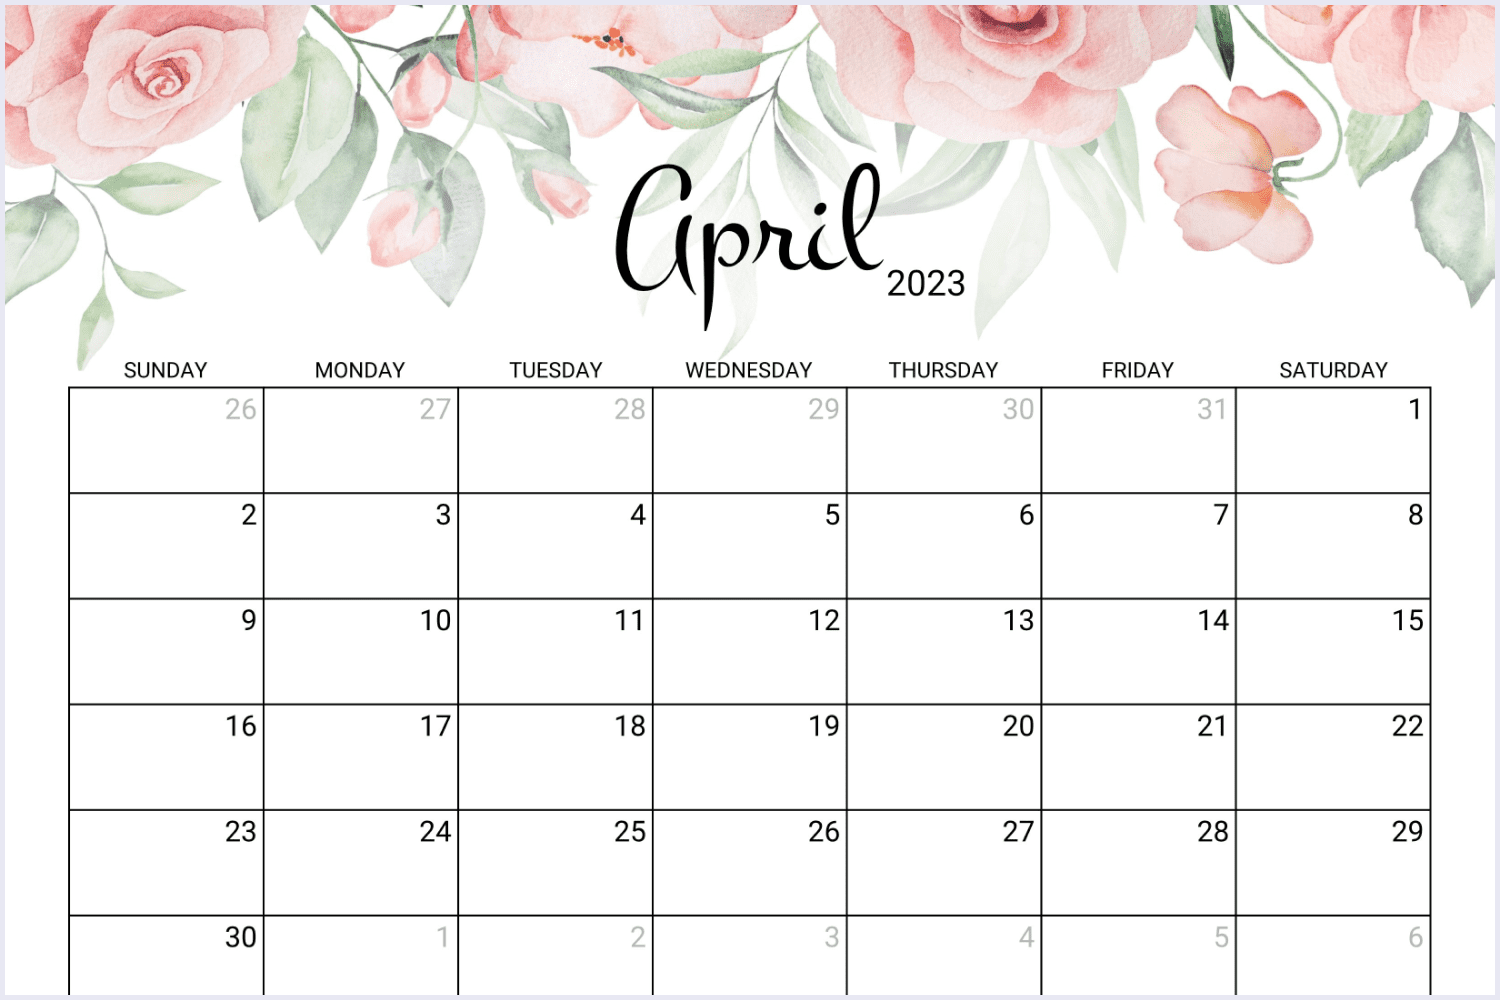 Calendar for April 2023 with beautiful roses.